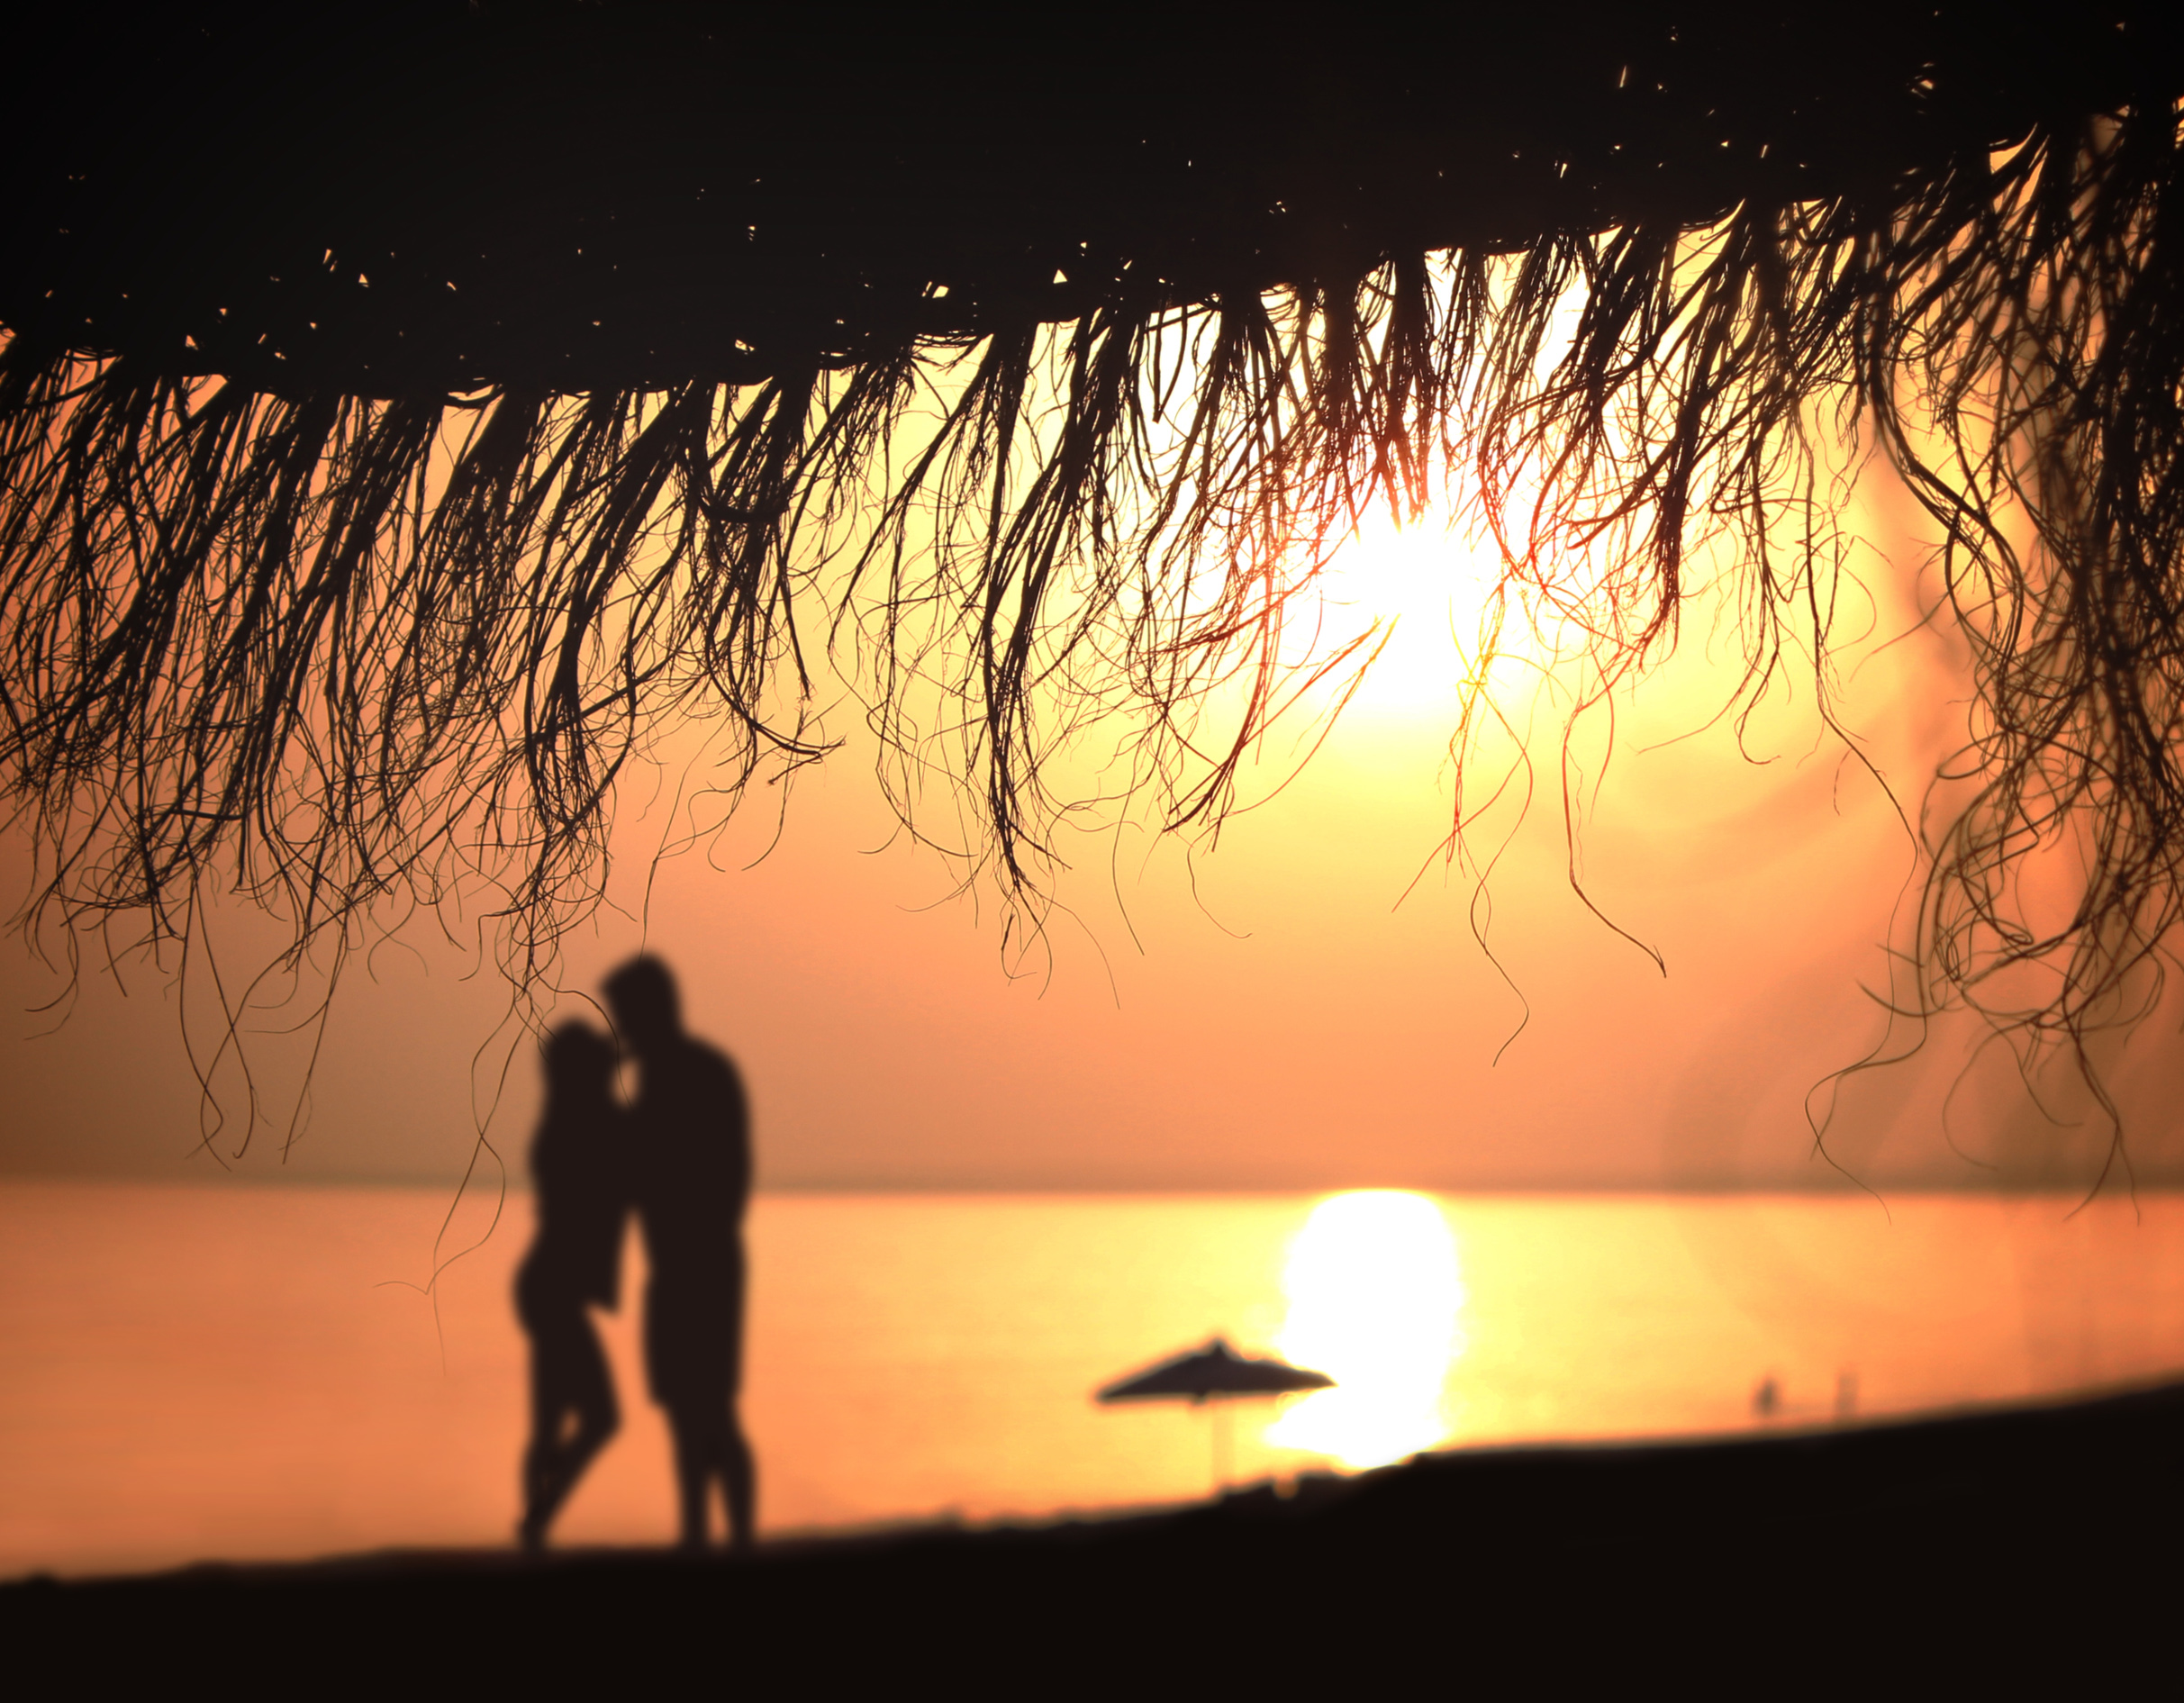 Under the umbrella - A couple kisses, Active, Relaxation, Secluded, Seascape, HQ Photo